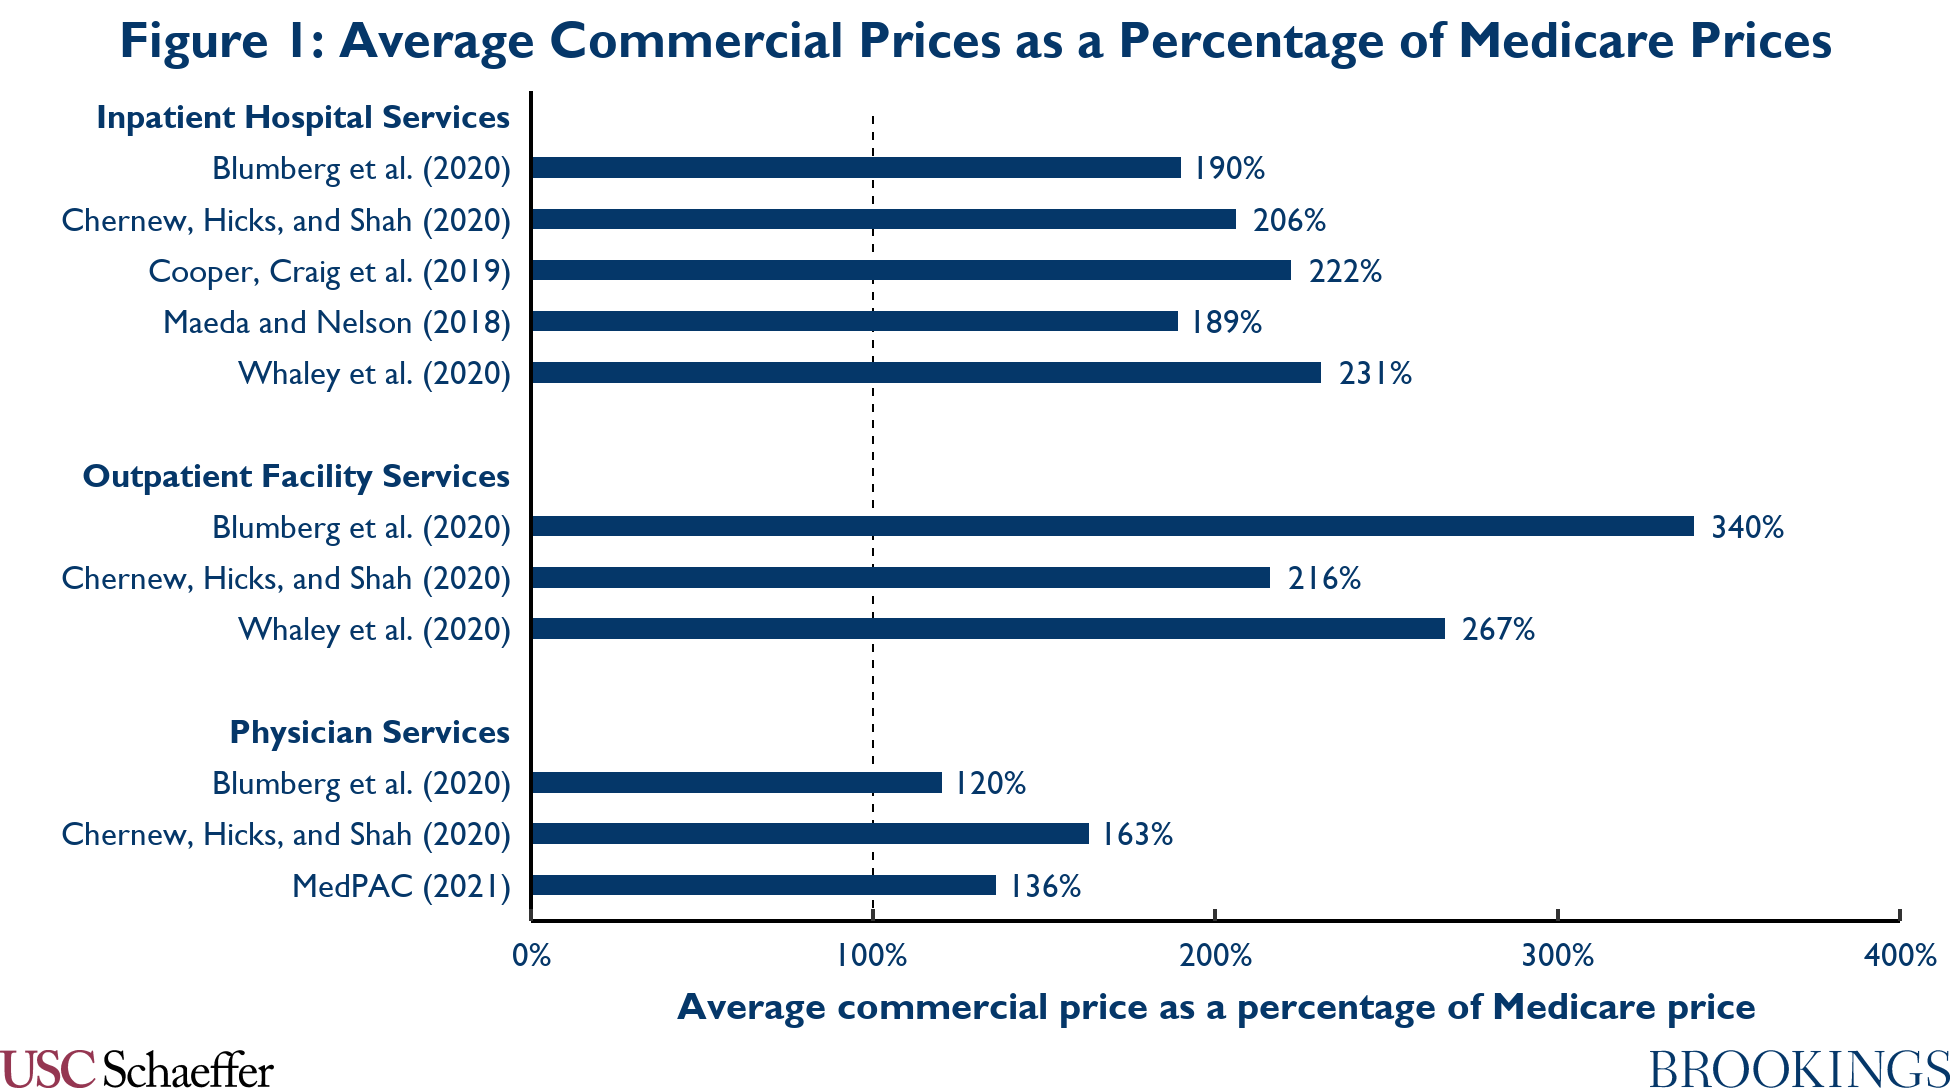 Average commercial prices as a percentage of Medicare prices